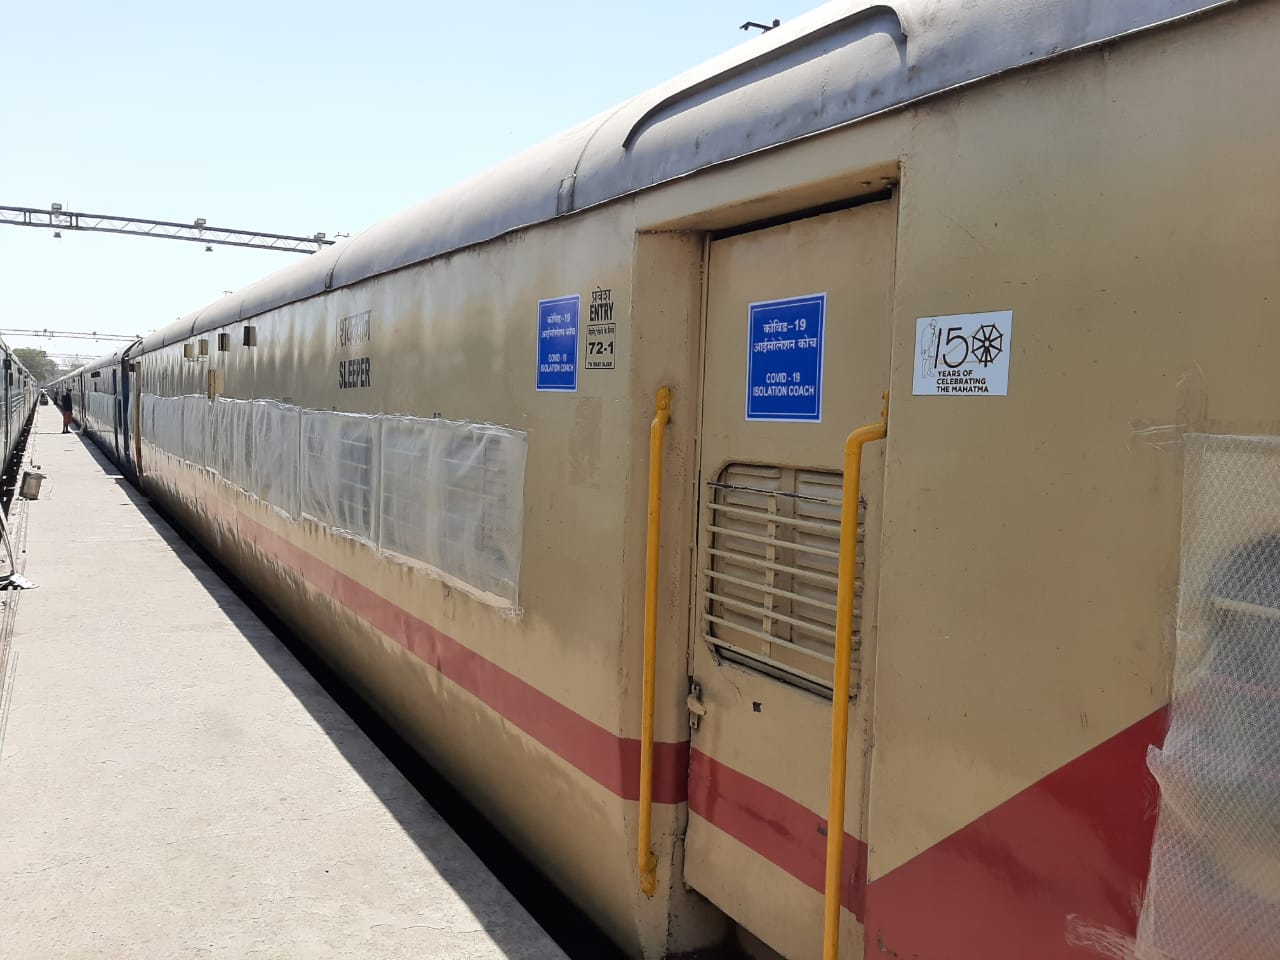 Indian Railway operated 642 Special Trains for workers across the country by 13 May 2020